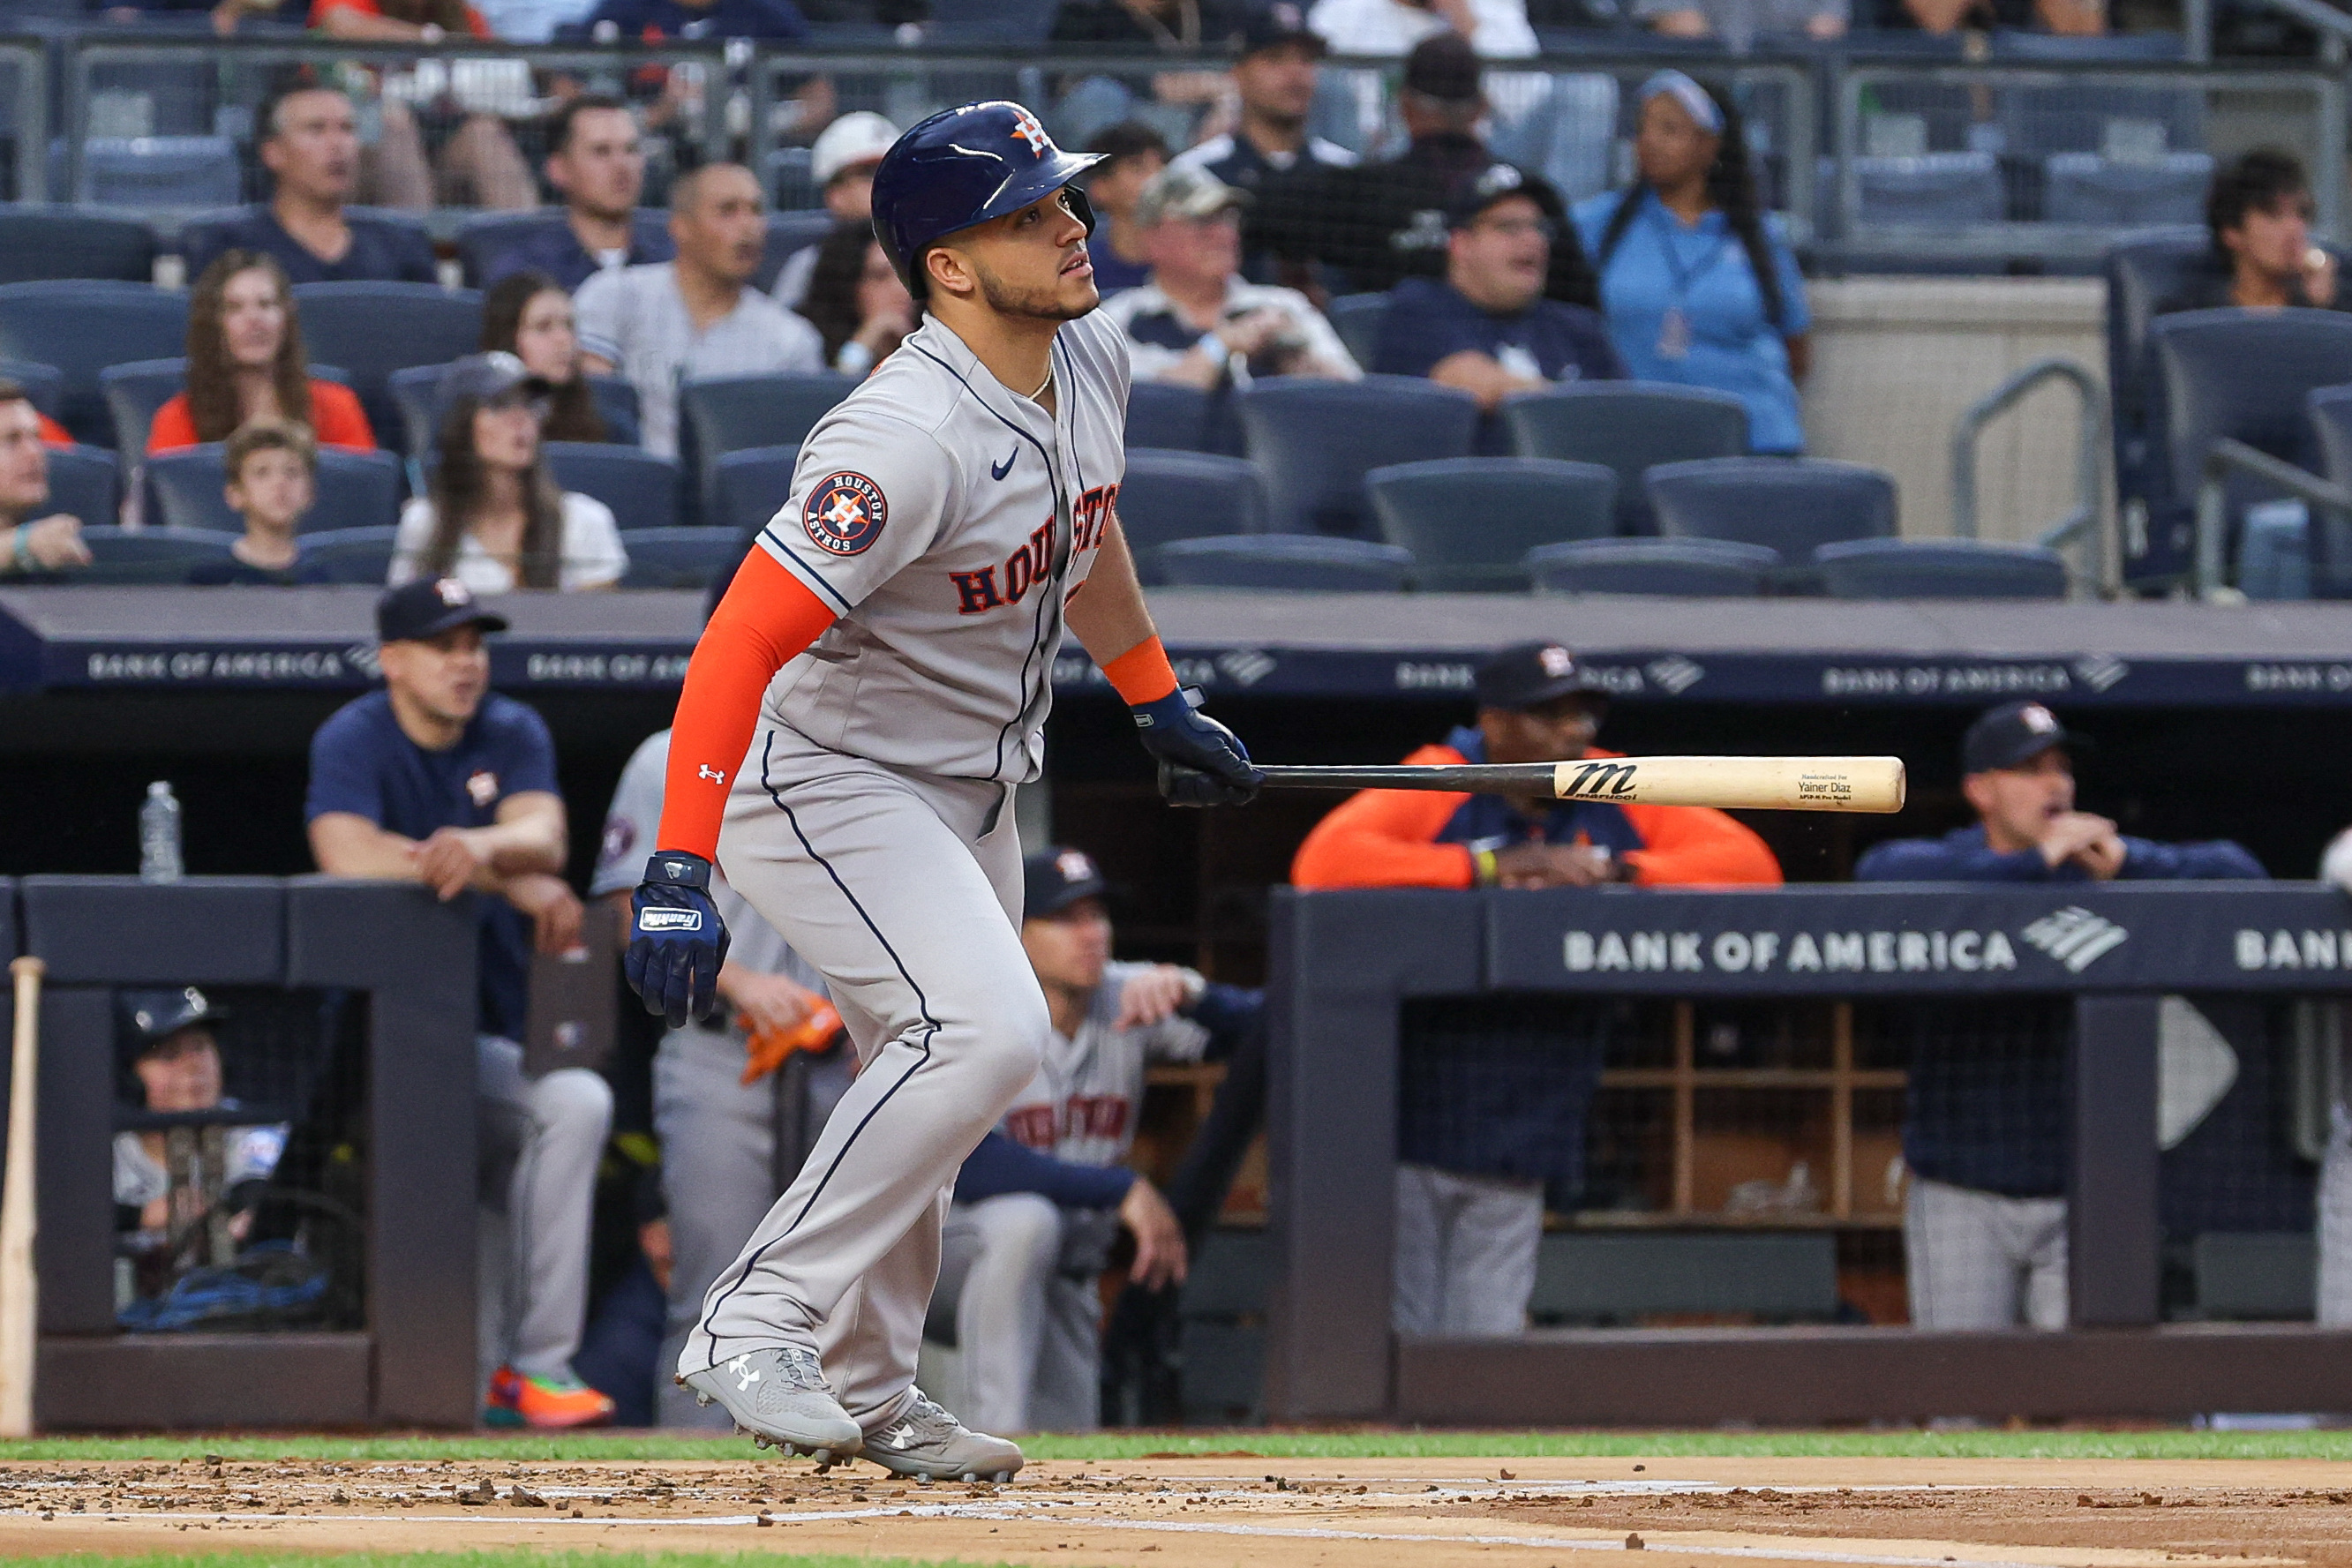 Giancarlo Stanton suffers through another 0-fer in Yankees' loss